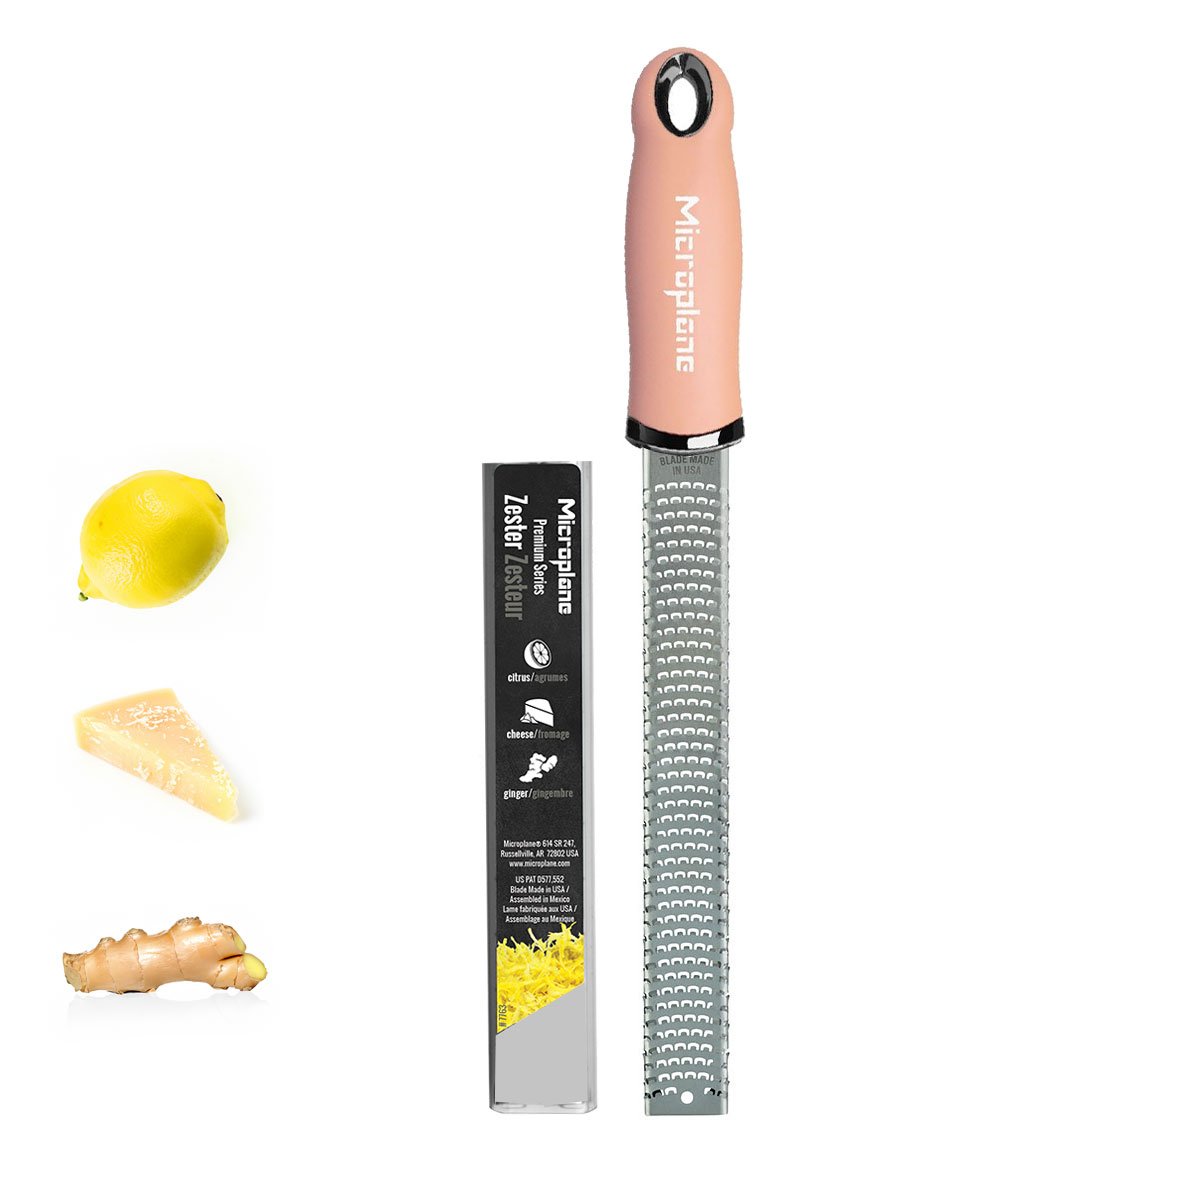 Zester Grater - Premium Classic Series (Dusty Rose), Microplane